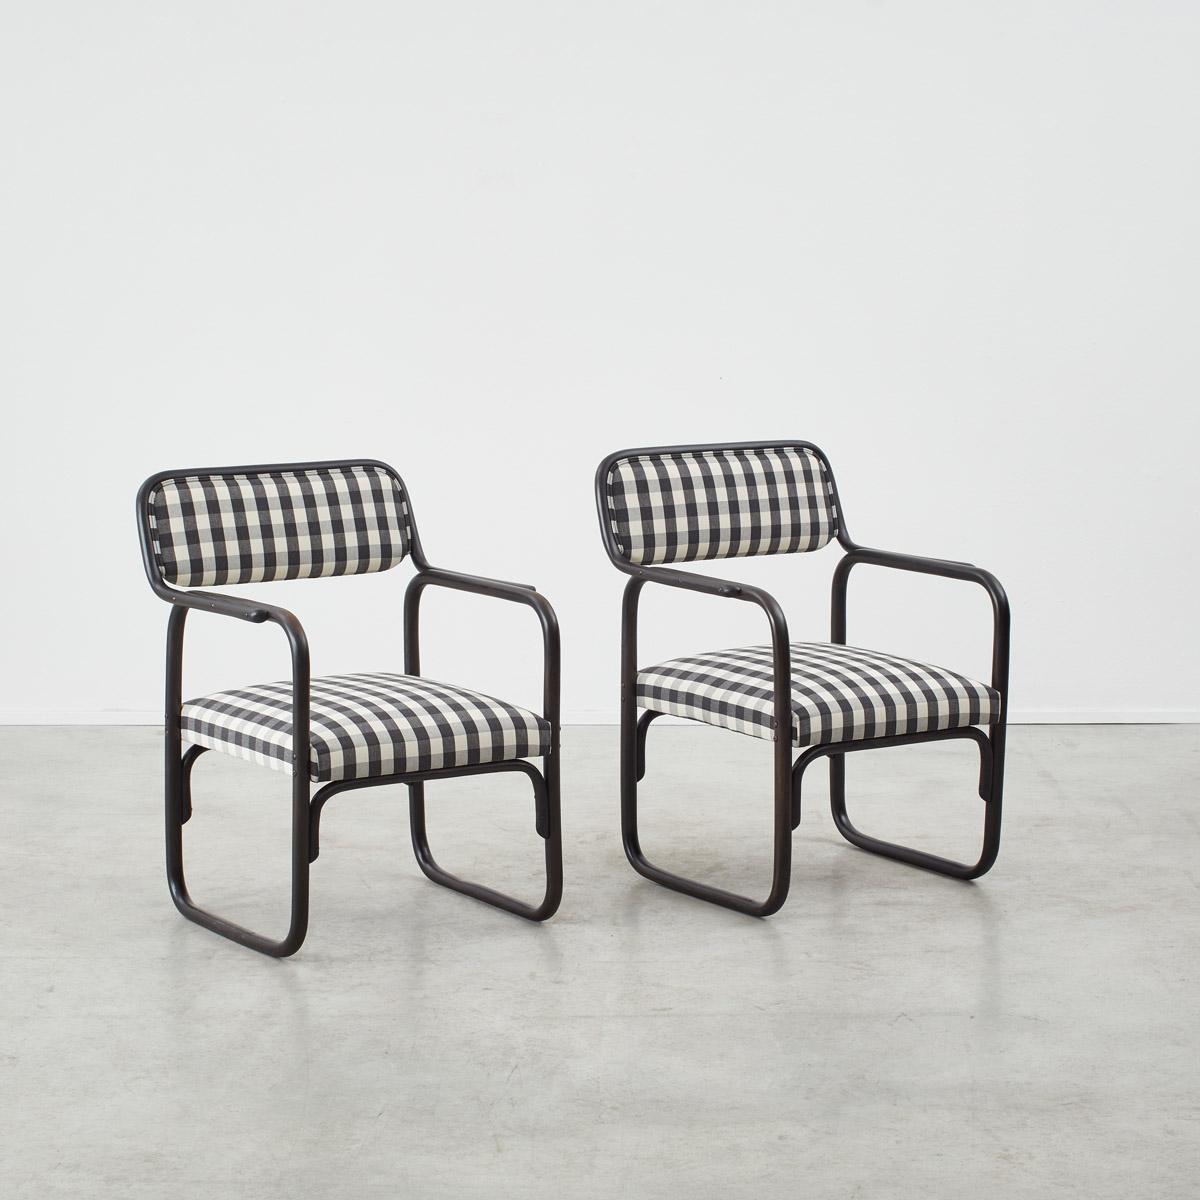 With their Bauhaus form this pair of ‘A 60 F’ armchairs by Thonet Mundus epitomise avant-garde design. Their arms and legs connect round to form a soft rectangular form, giving the chair a gentle yet stable rock. The A 60 series defied expectations